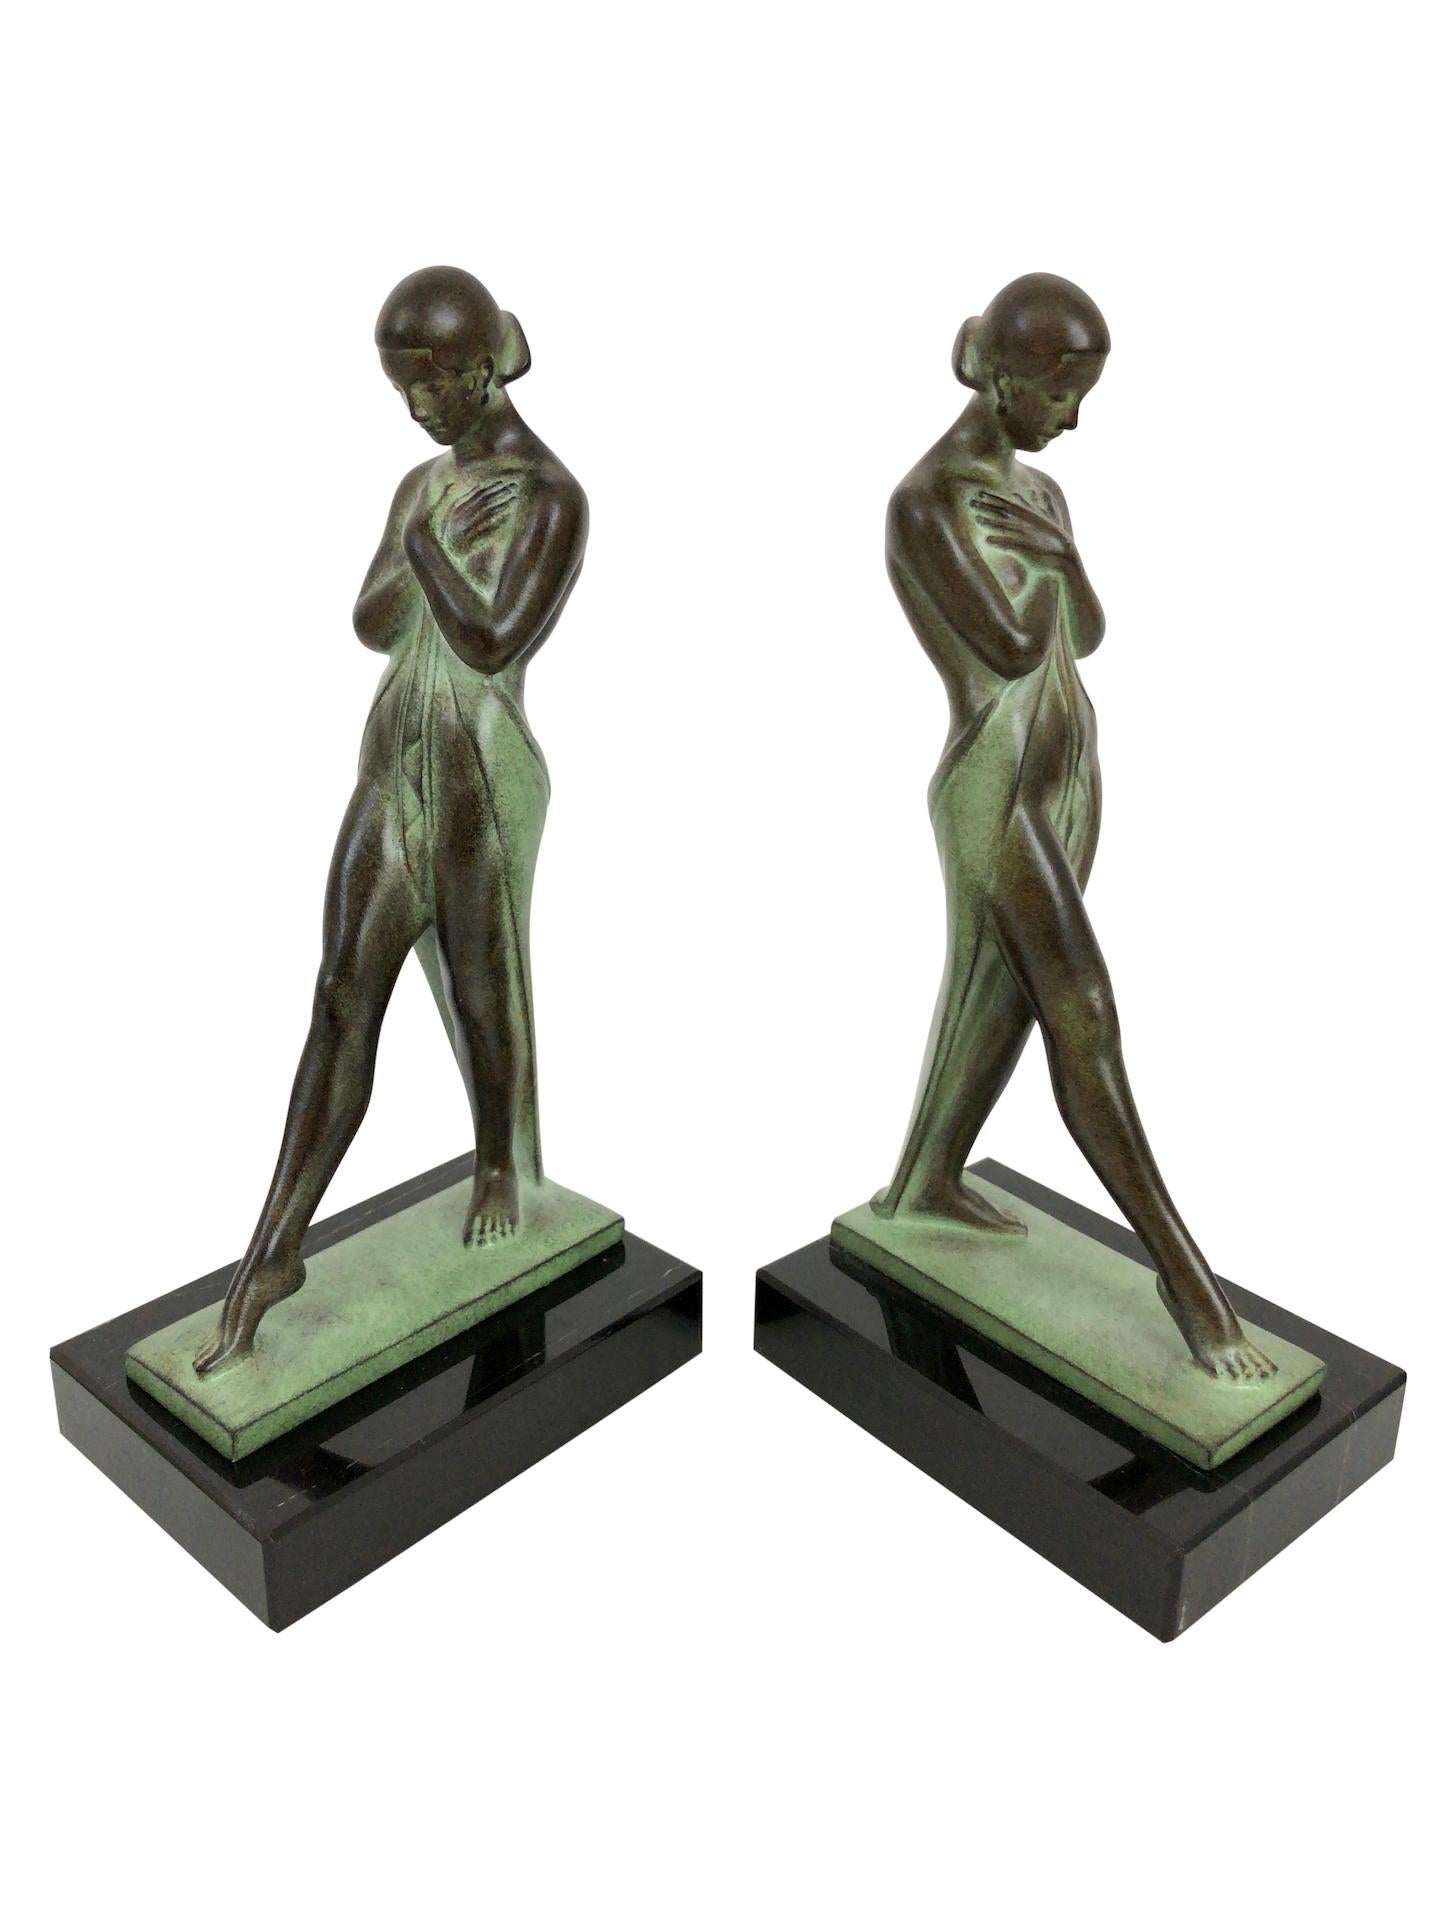 “Meditation”
Designed in France during the roaring 1920s by “Fayral”, which is one of the pseudonyms from “Pierre Le Faguays” (1892-1962), signed.
Original “Max Le Verrier”
Art Deco style, France.

Bookends made in “Régule” (spelter)
Socle in